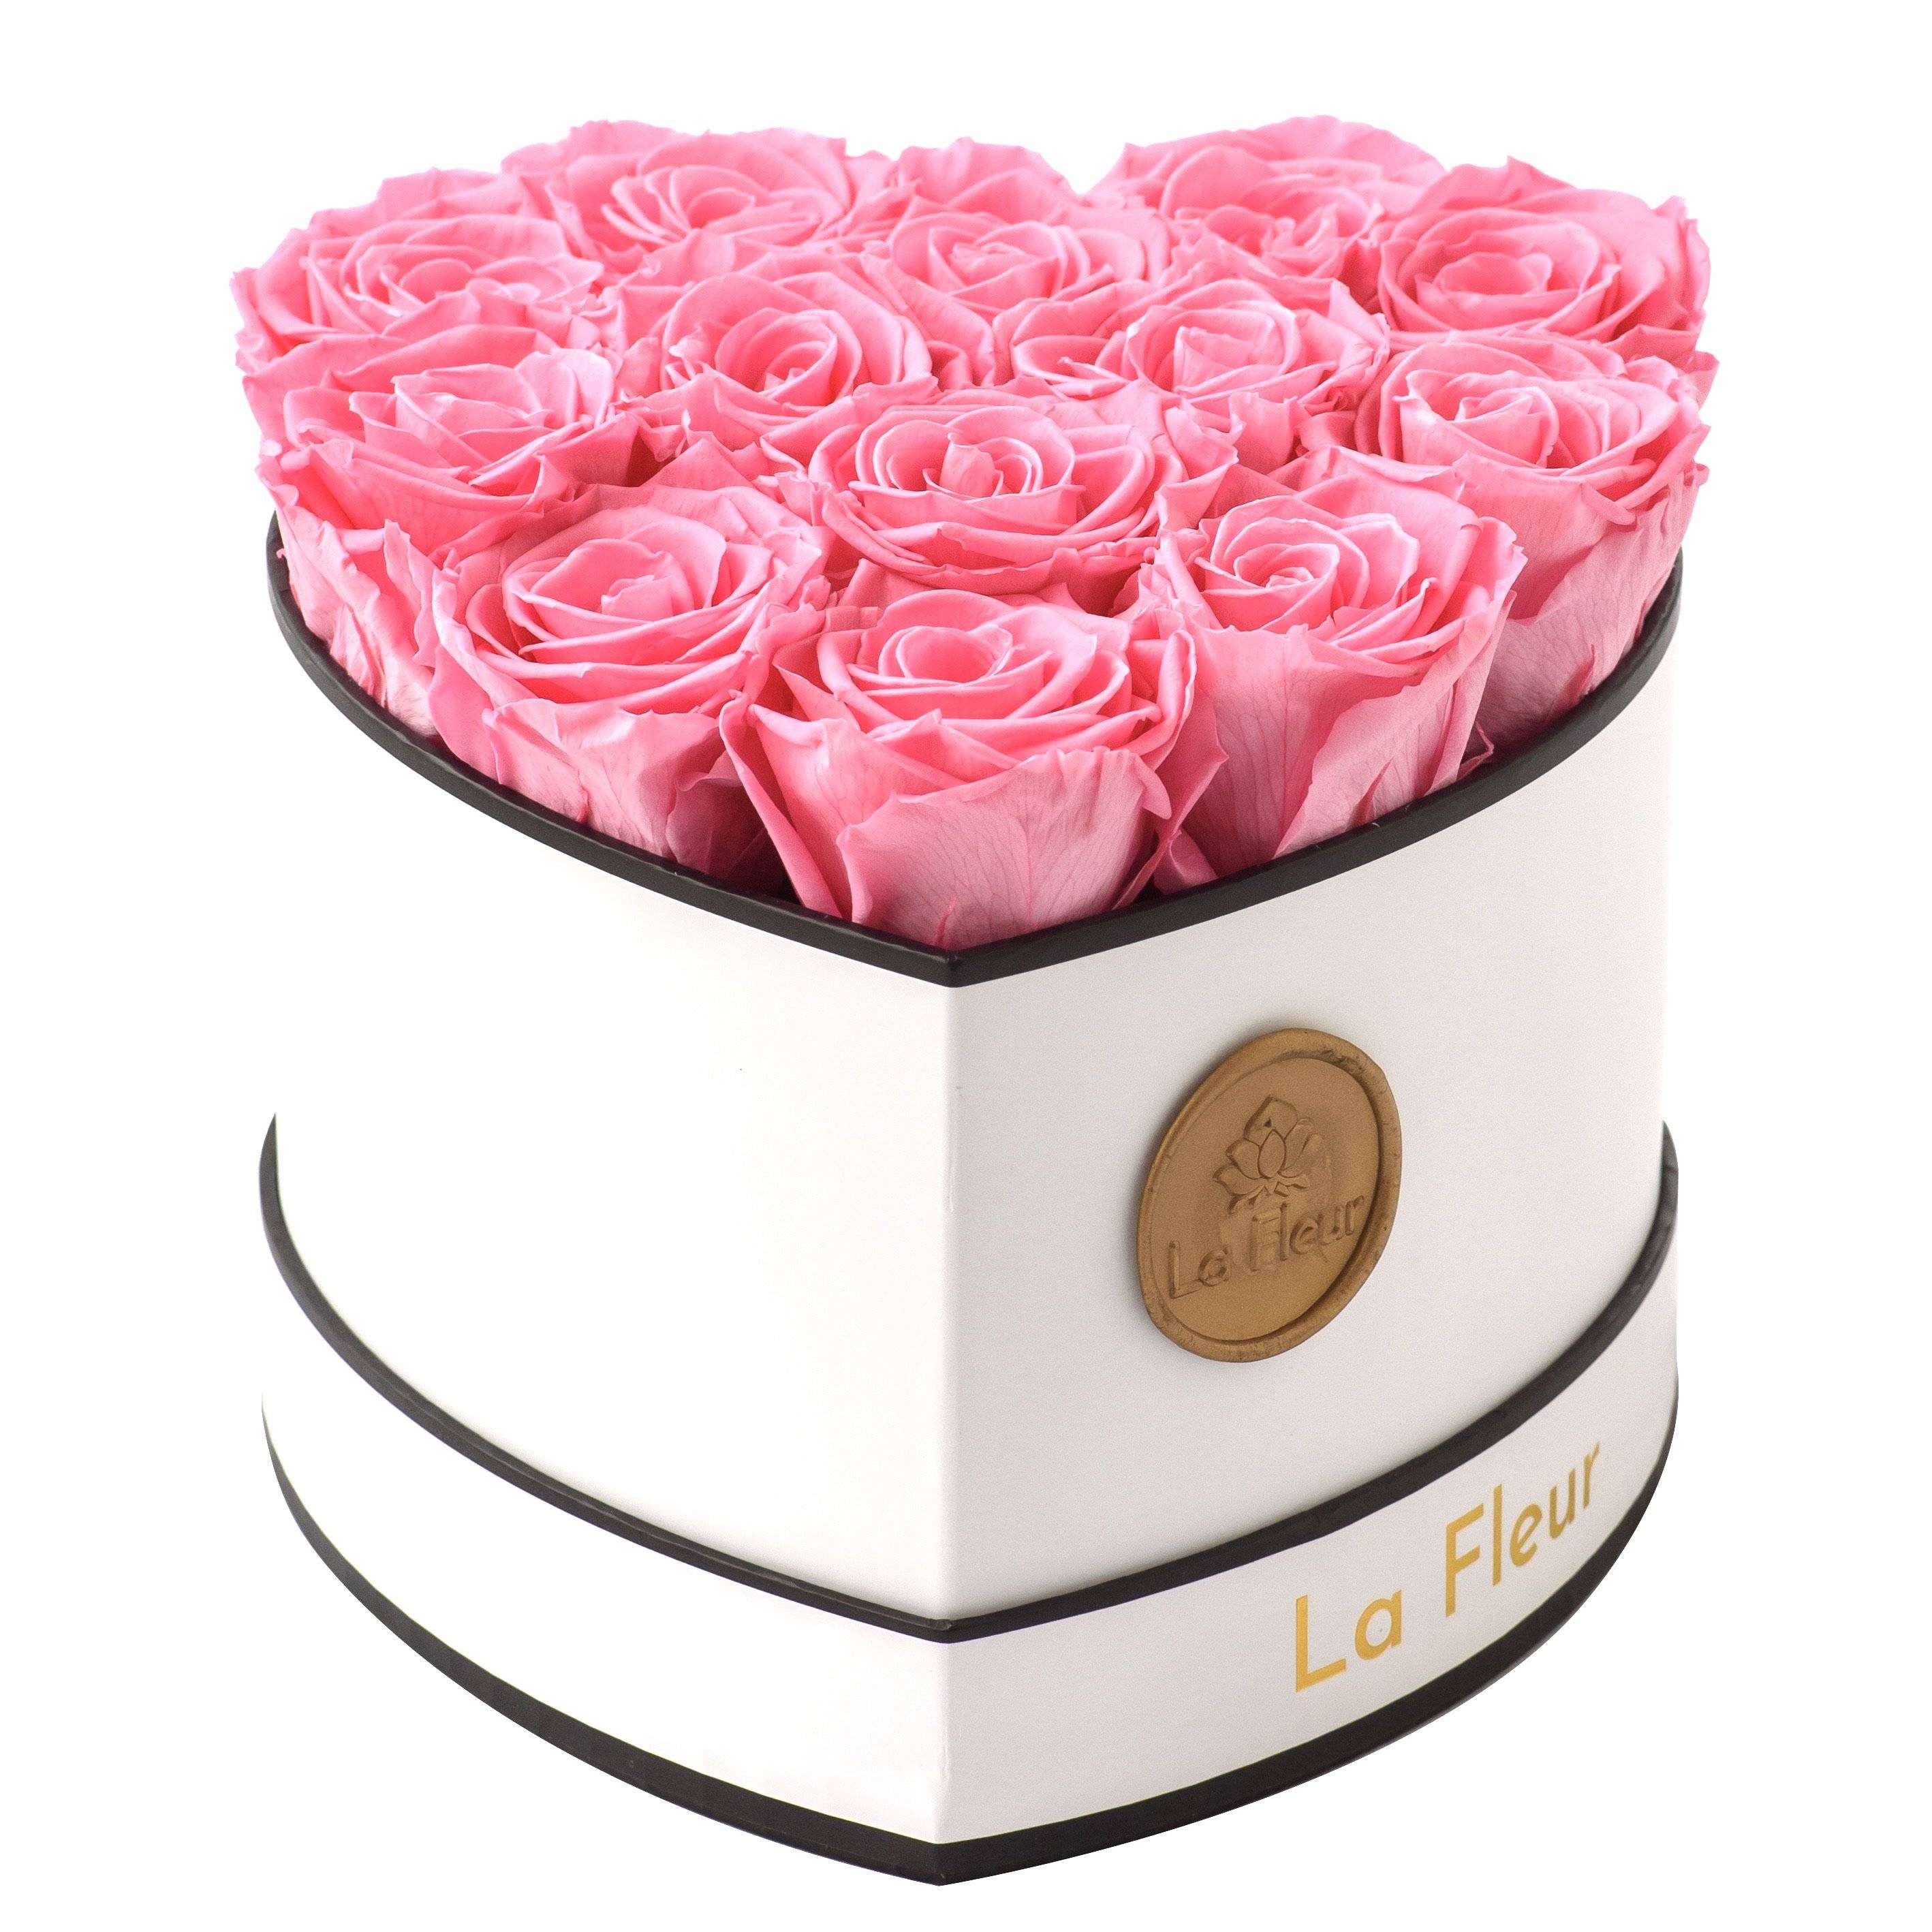 Pink roses in a heart shaped box